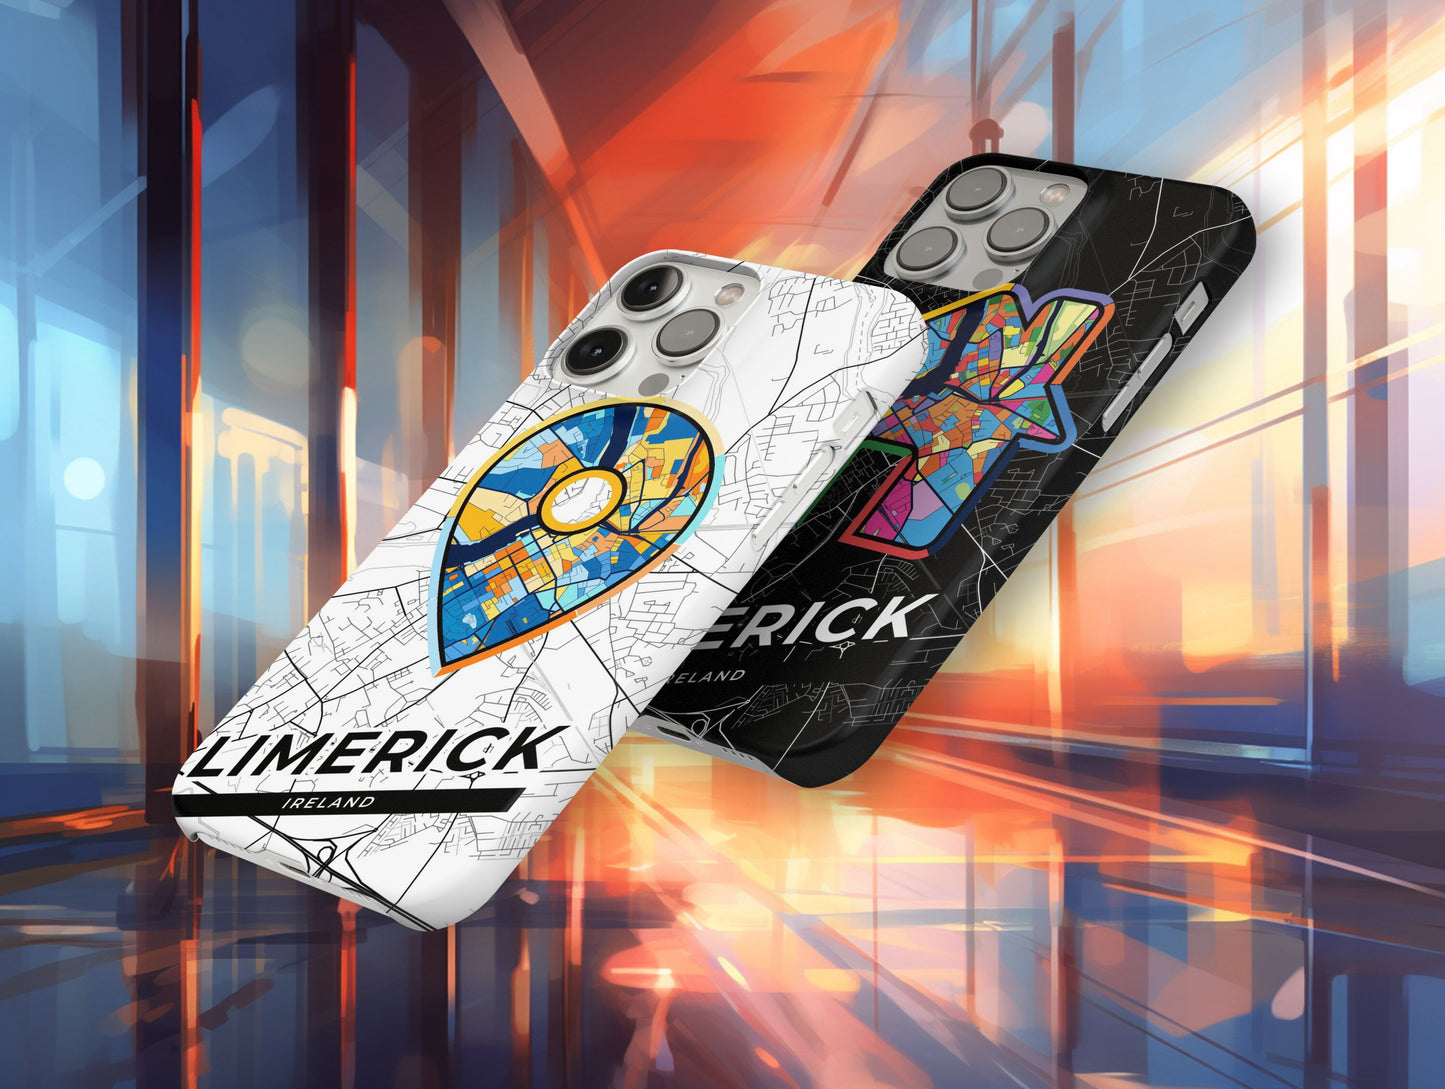 Limerick Ireland slim phone case with colorful icon. Birthday, wedding or housewarming gift. Couple match cases.